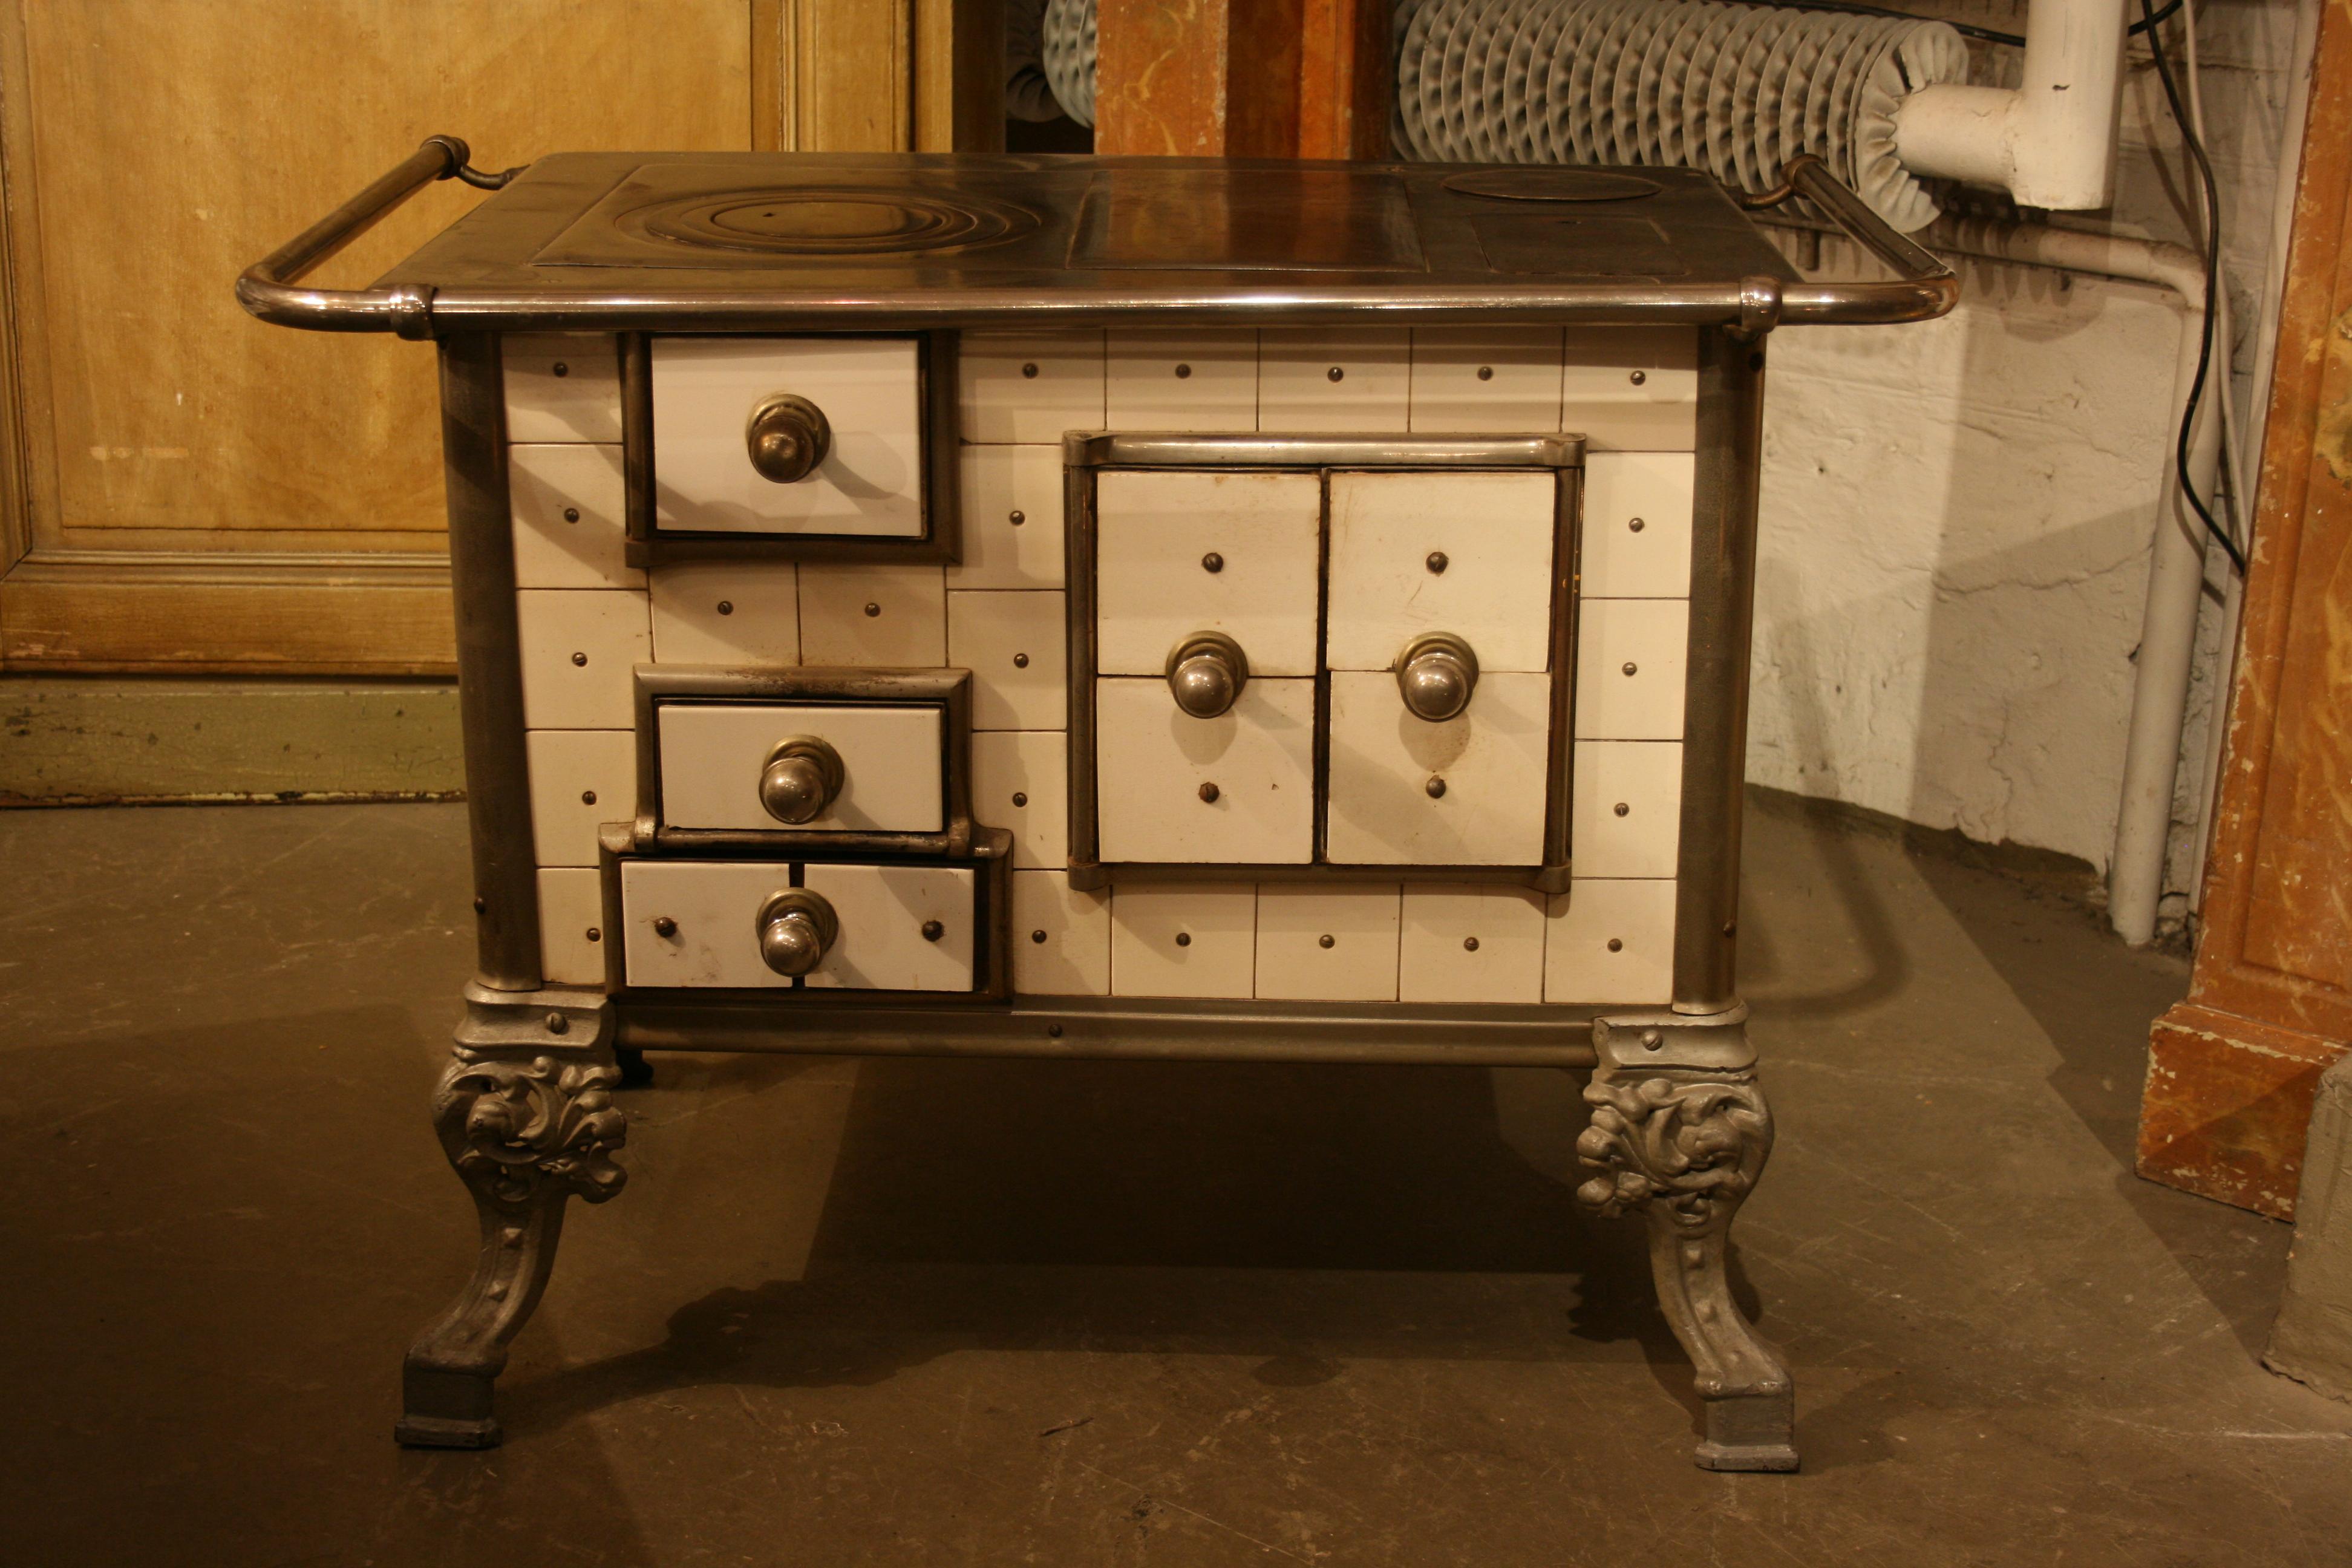 Original old French stove from circa 1900 with white tiles and round cast-iron combustion chamber insert, as well as 4 cast-iron feet. The trigger is in the back right. The firing takes place from above. The right-hand doors close the baking chamber